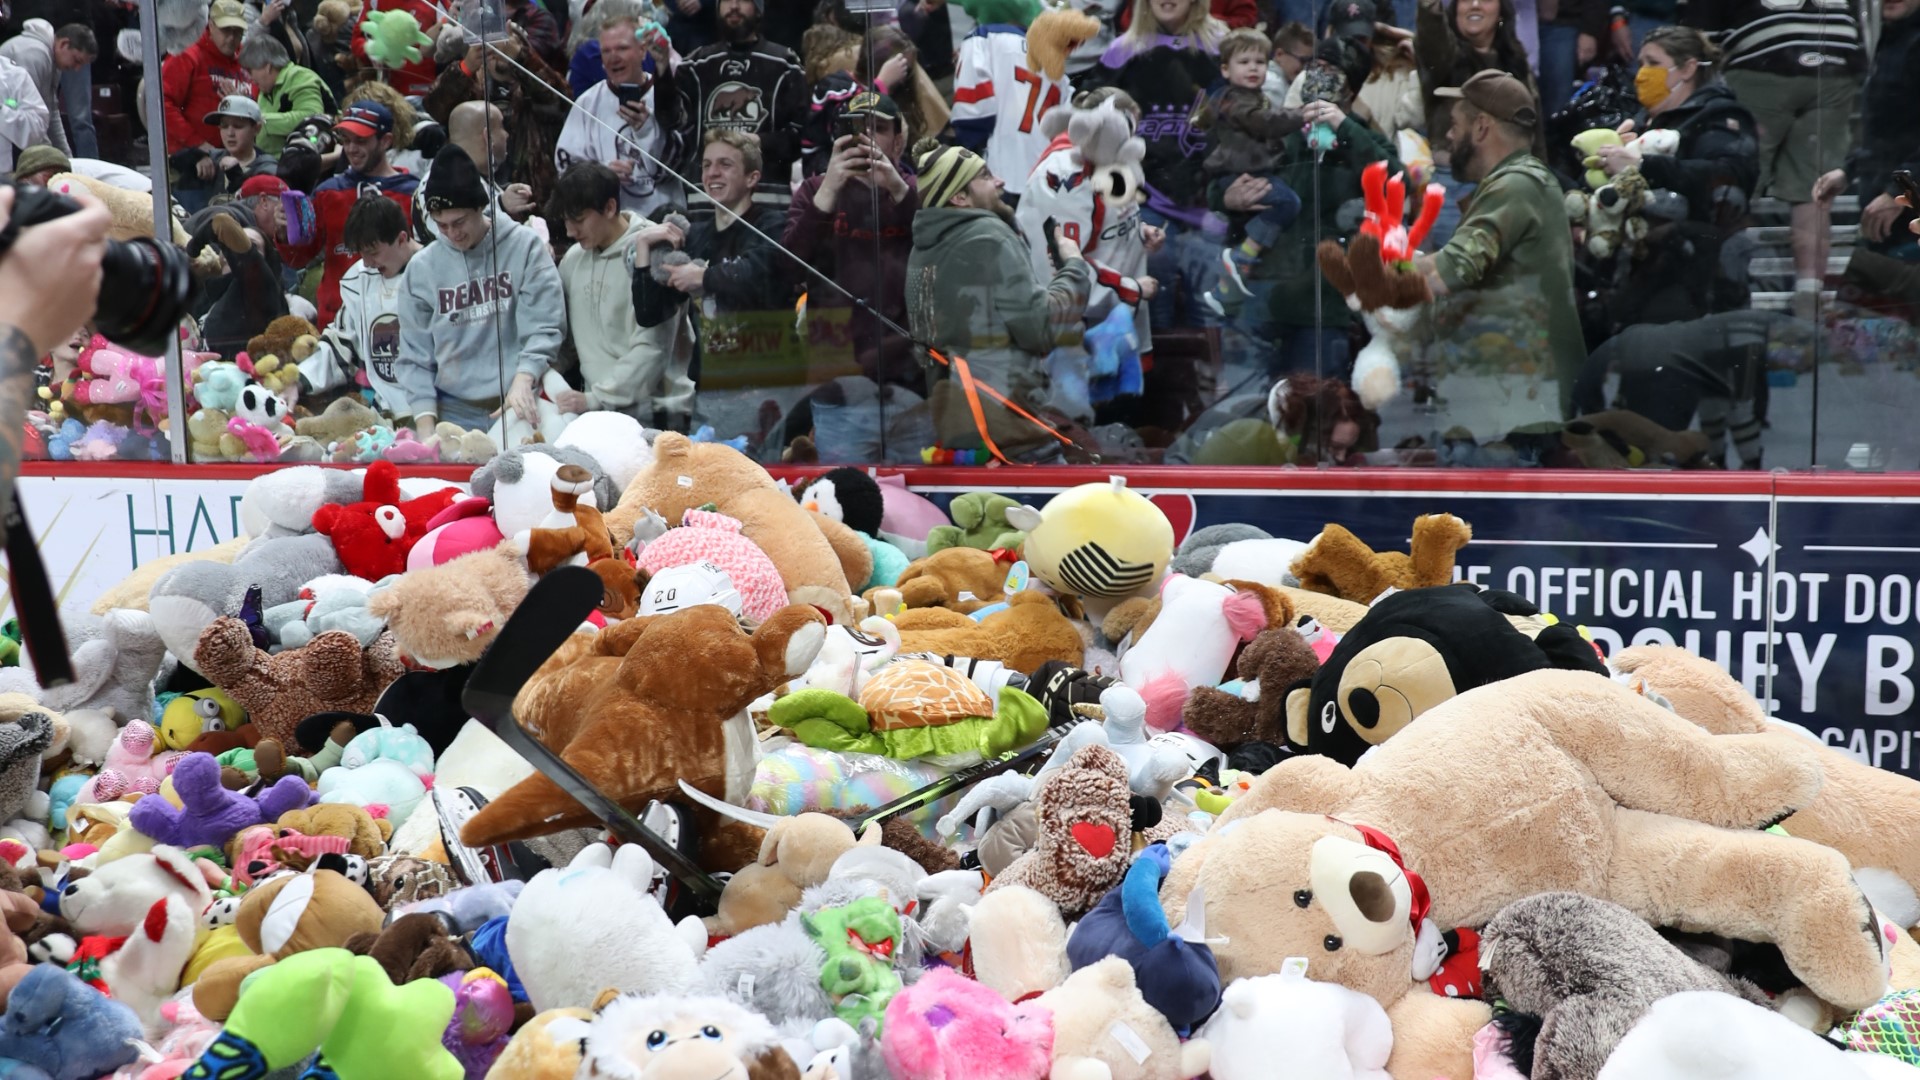 The Hershey Bears' 21st annual Teddy Bear Toss will take place on Sunday at 3 p.m.